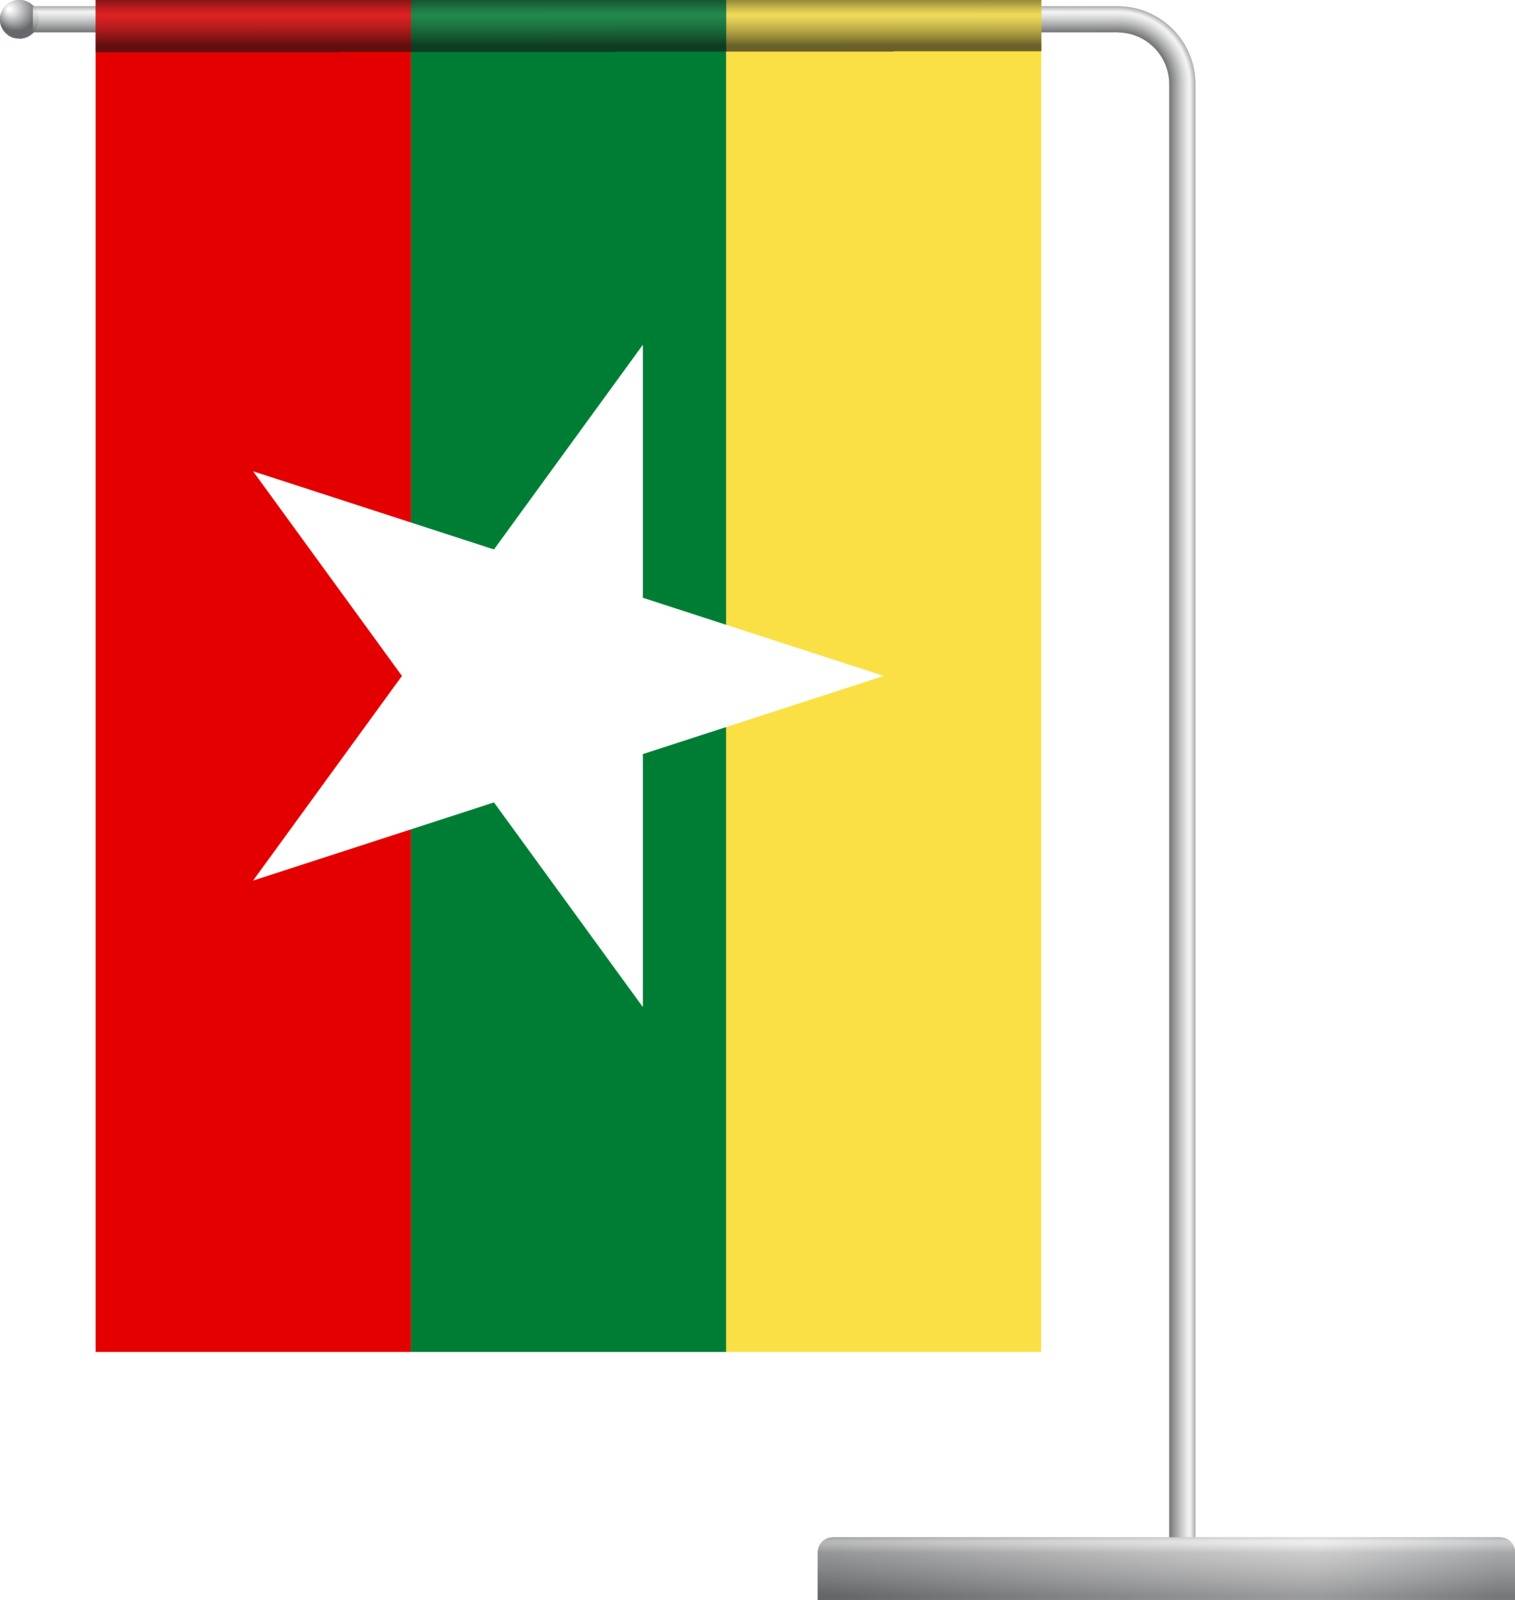 Burma flag on pole icon by Visual-Content